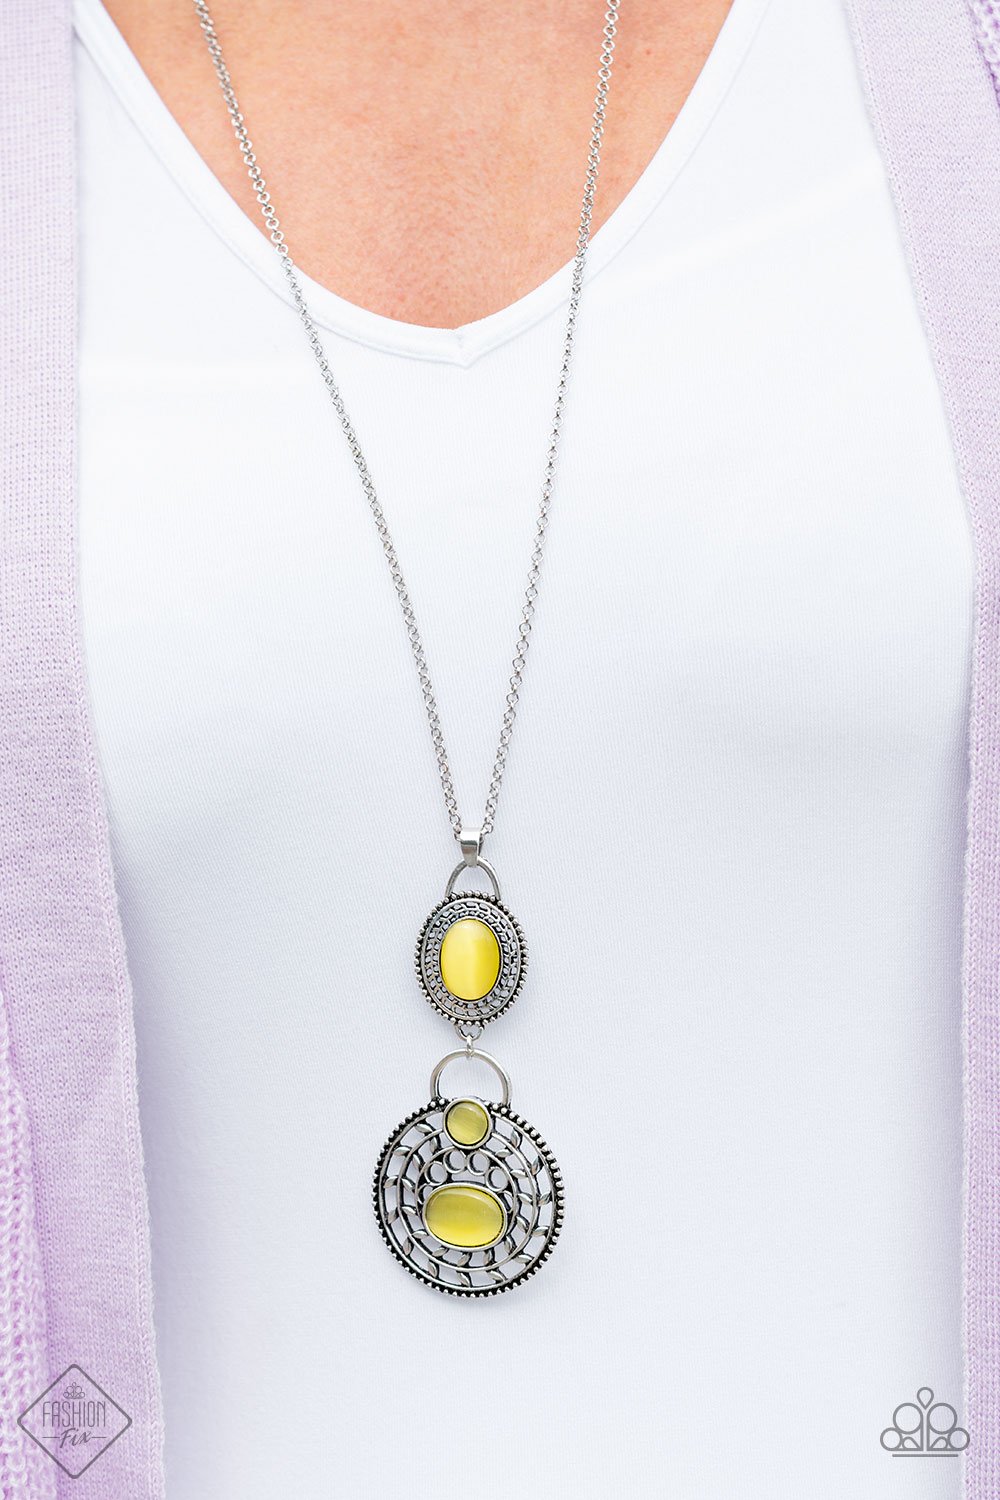 Paparazzi Accessories  - Hook, Vine, and Sinker #N332 Peg - Yellow Necklace